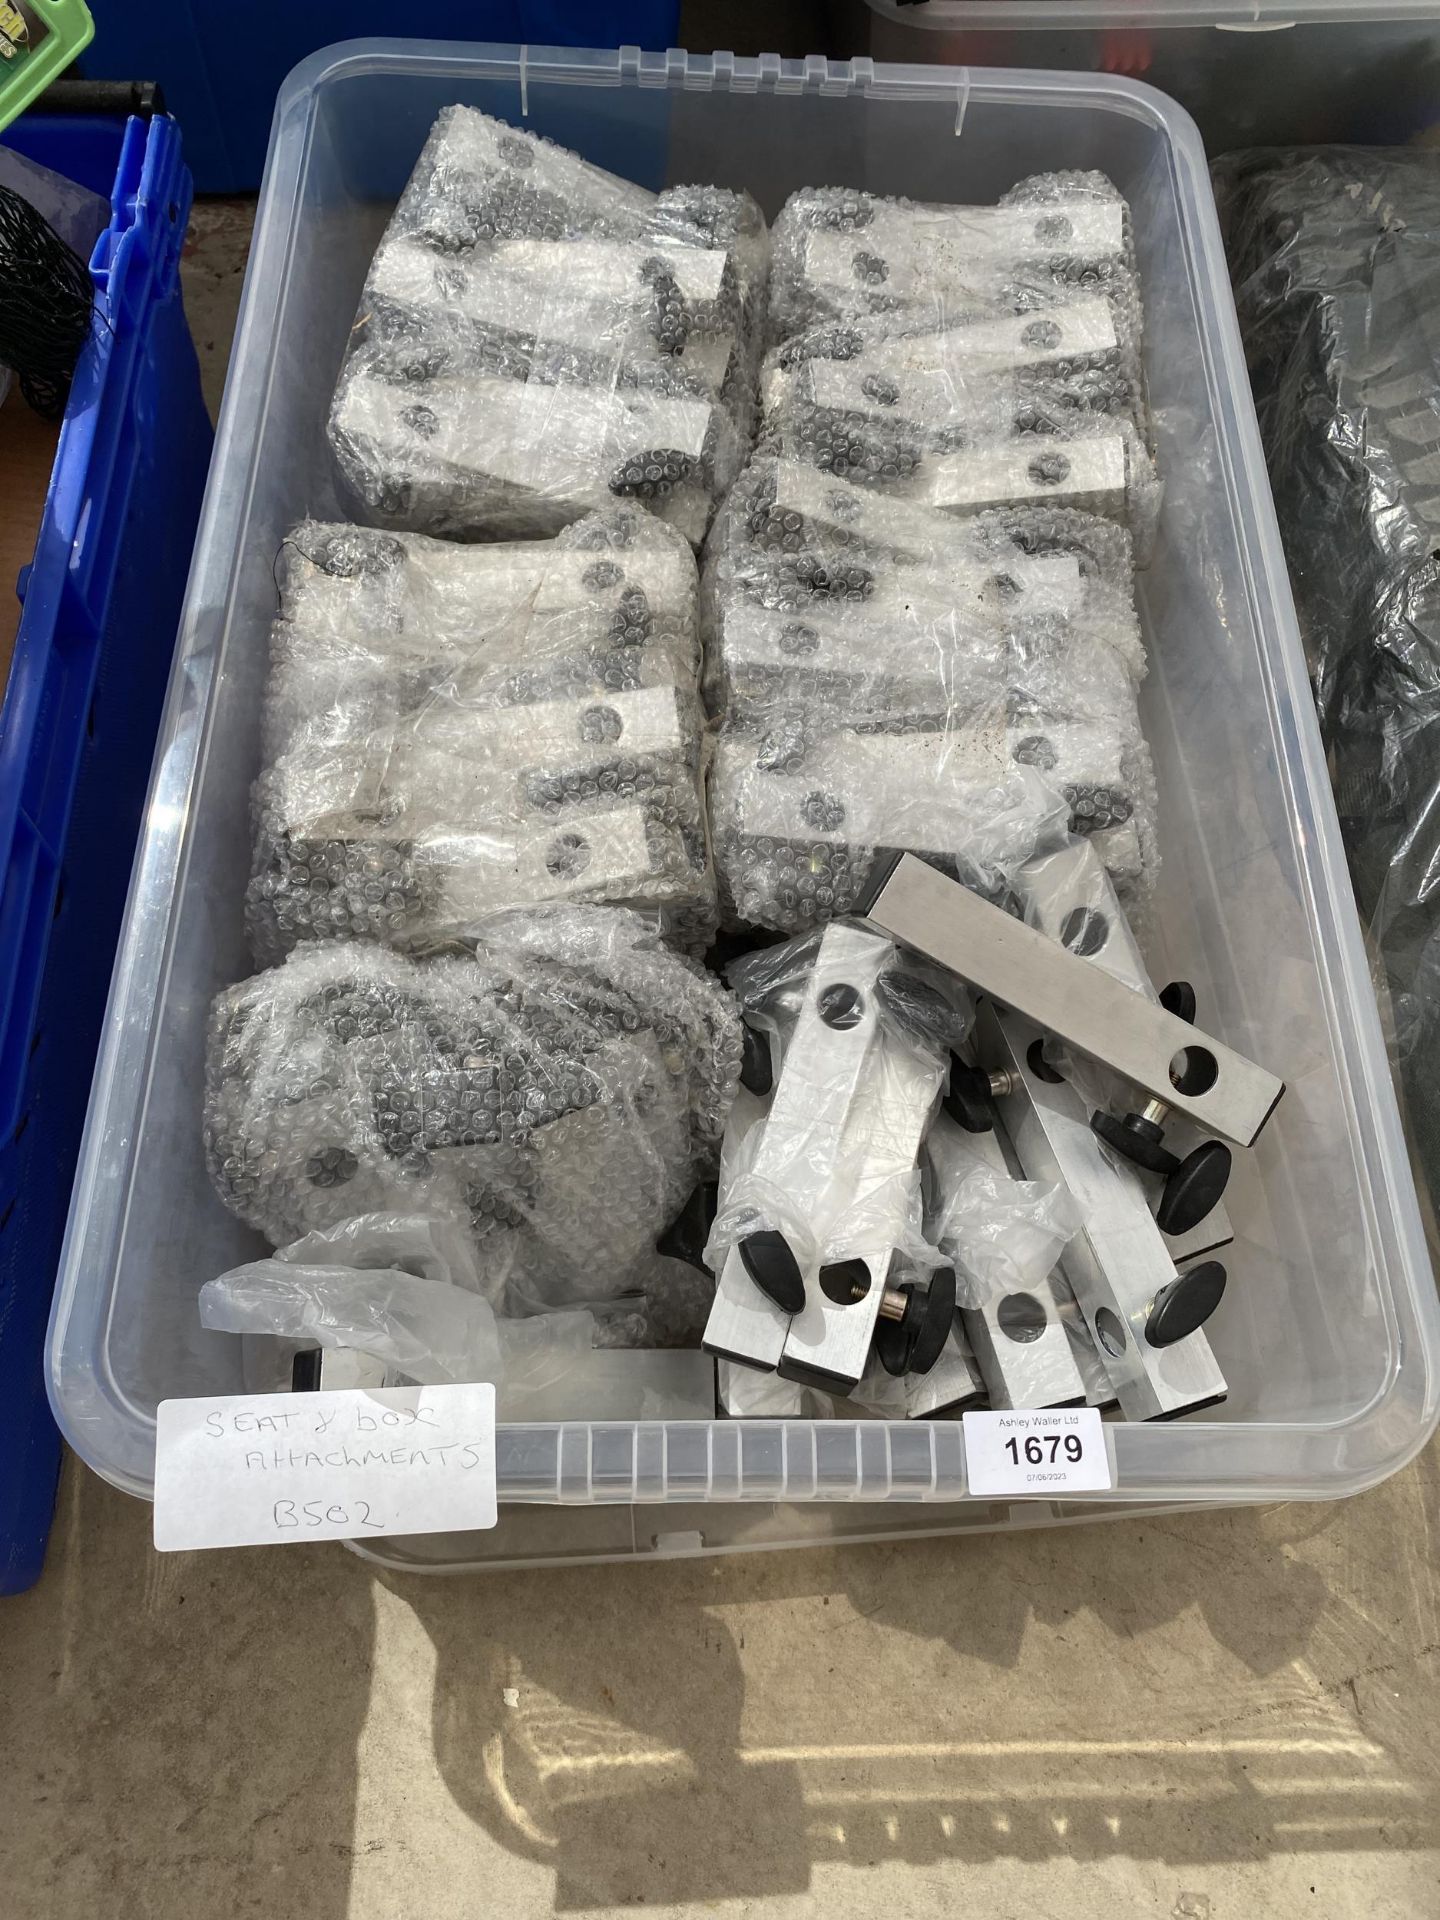 A BOX CONTAINING A LARGE QUANTITY OF SEAT OR BOX ATTATCHMENT BRACKETS (FROM A TACKLE SHOP CLEARANCE)